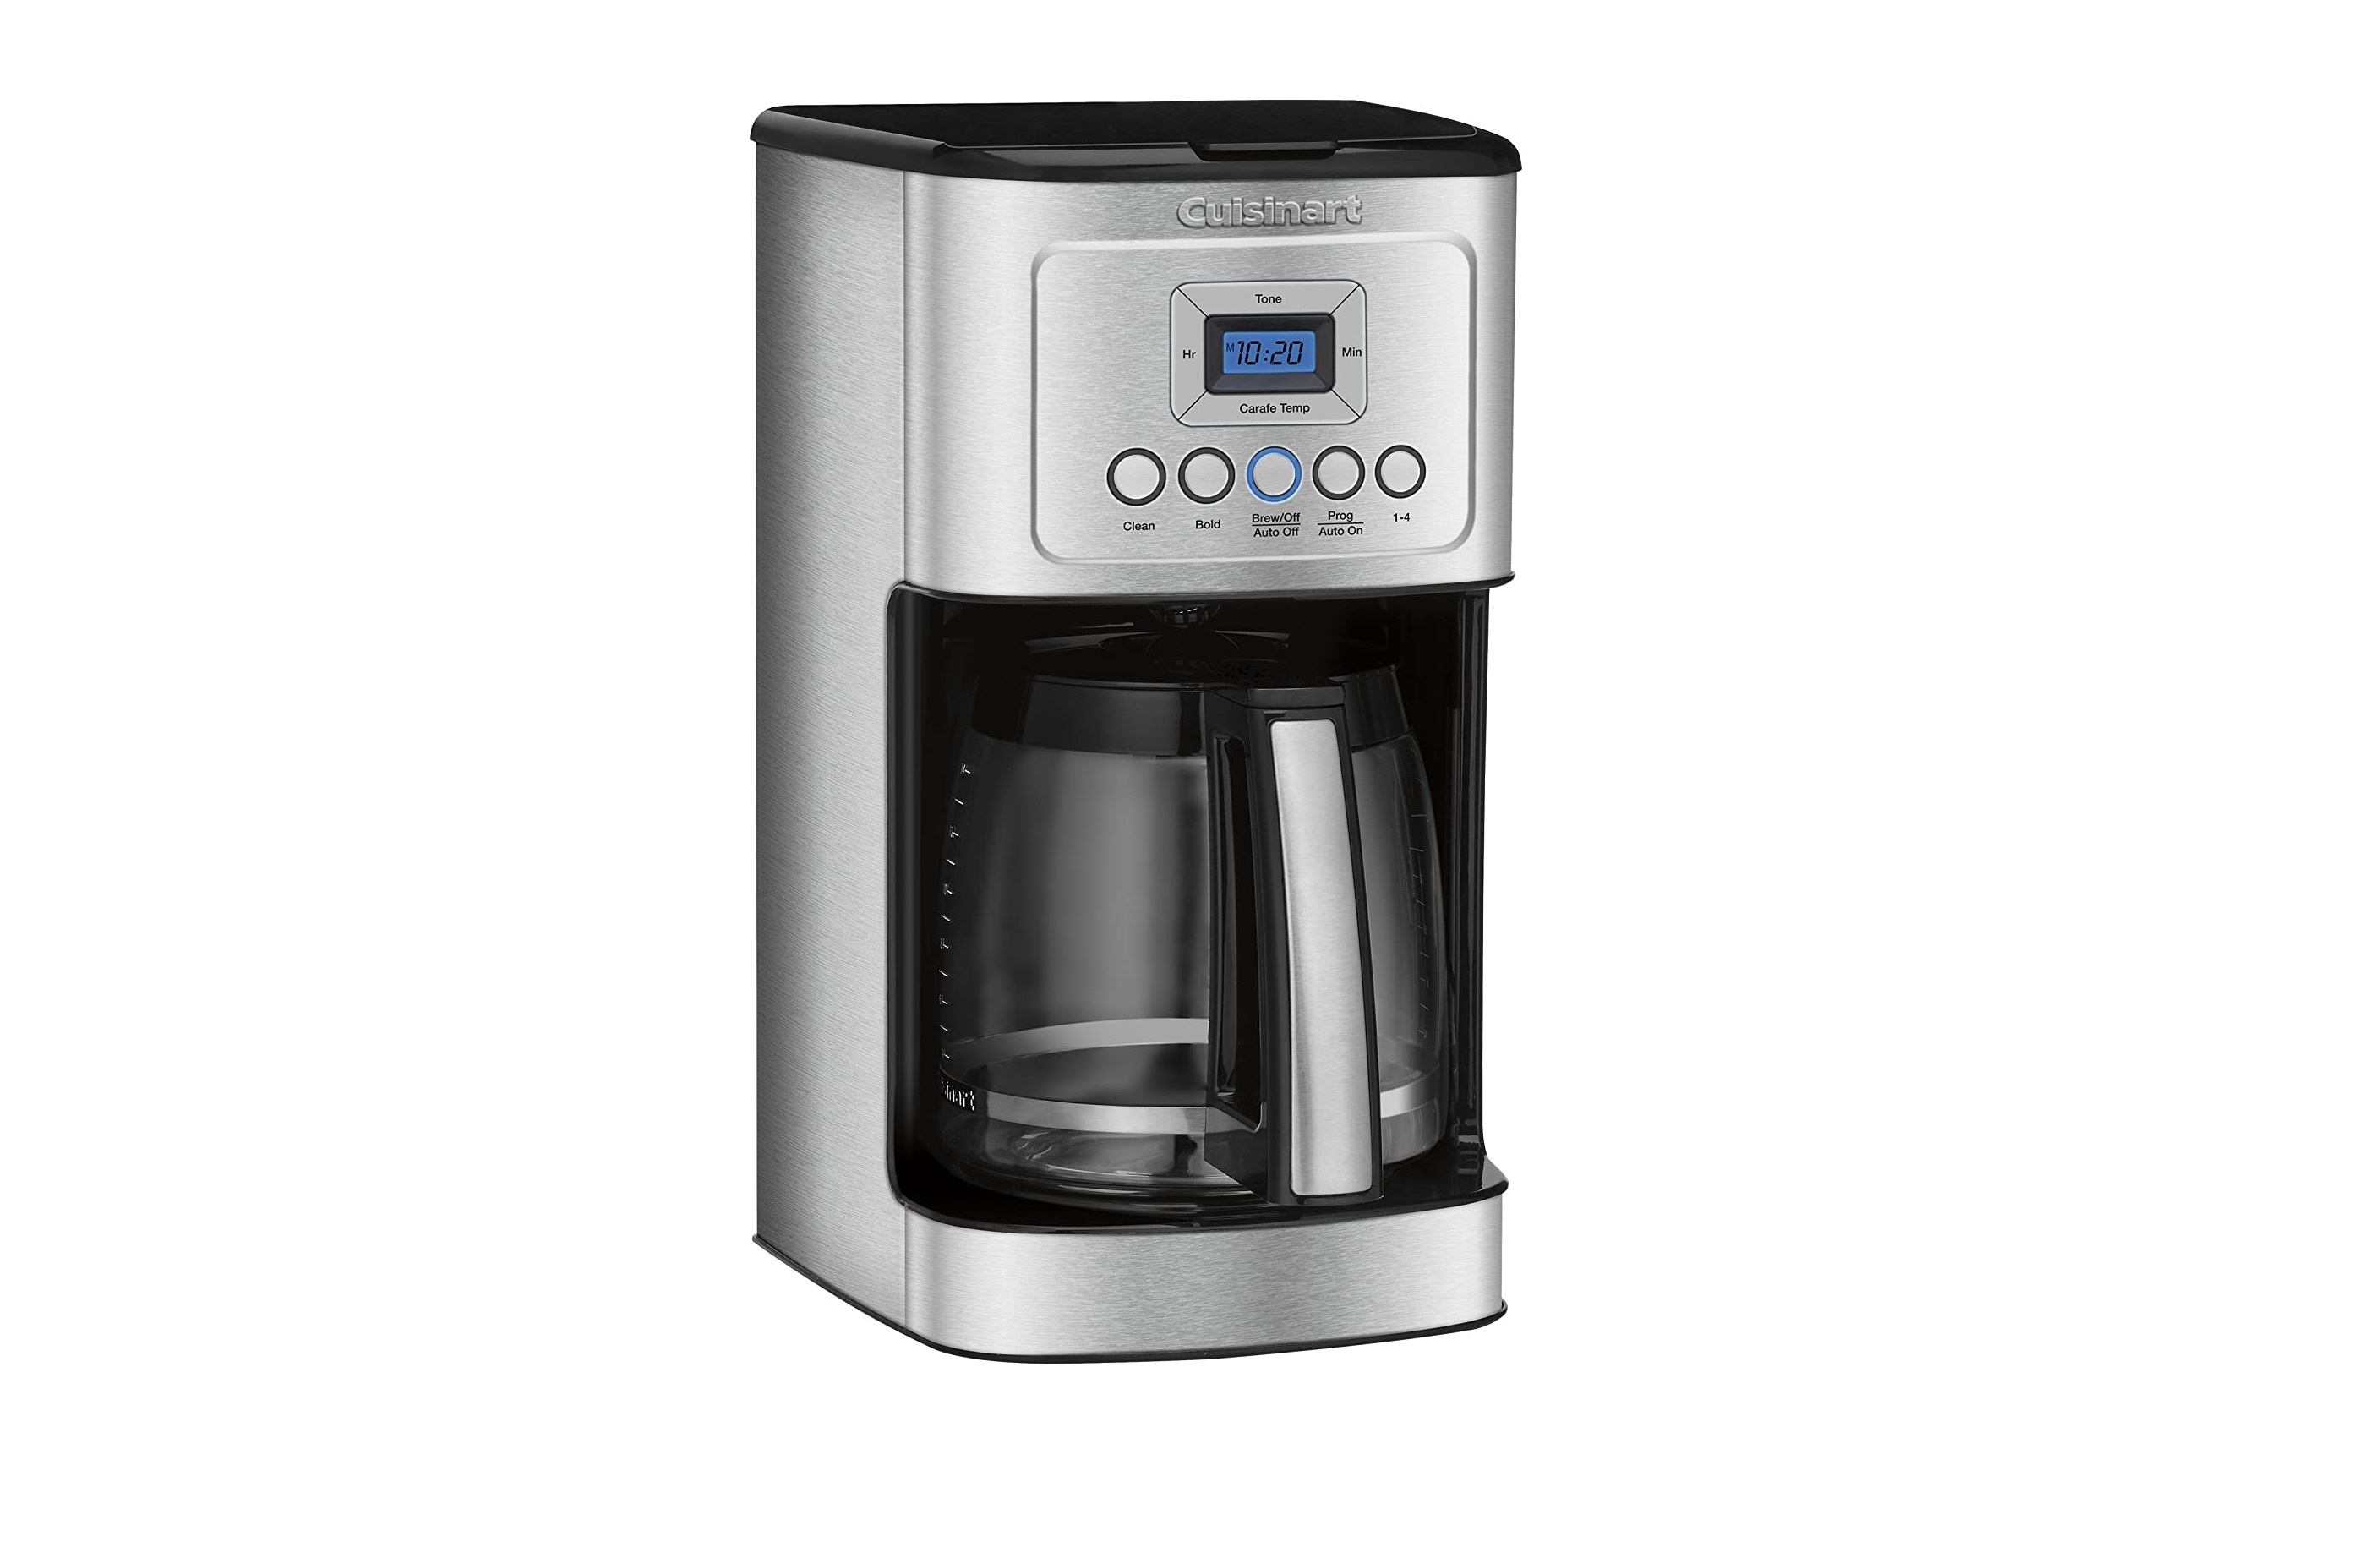 Cyber Monday deals on coffee makers from Keurig, Cuisinart and more